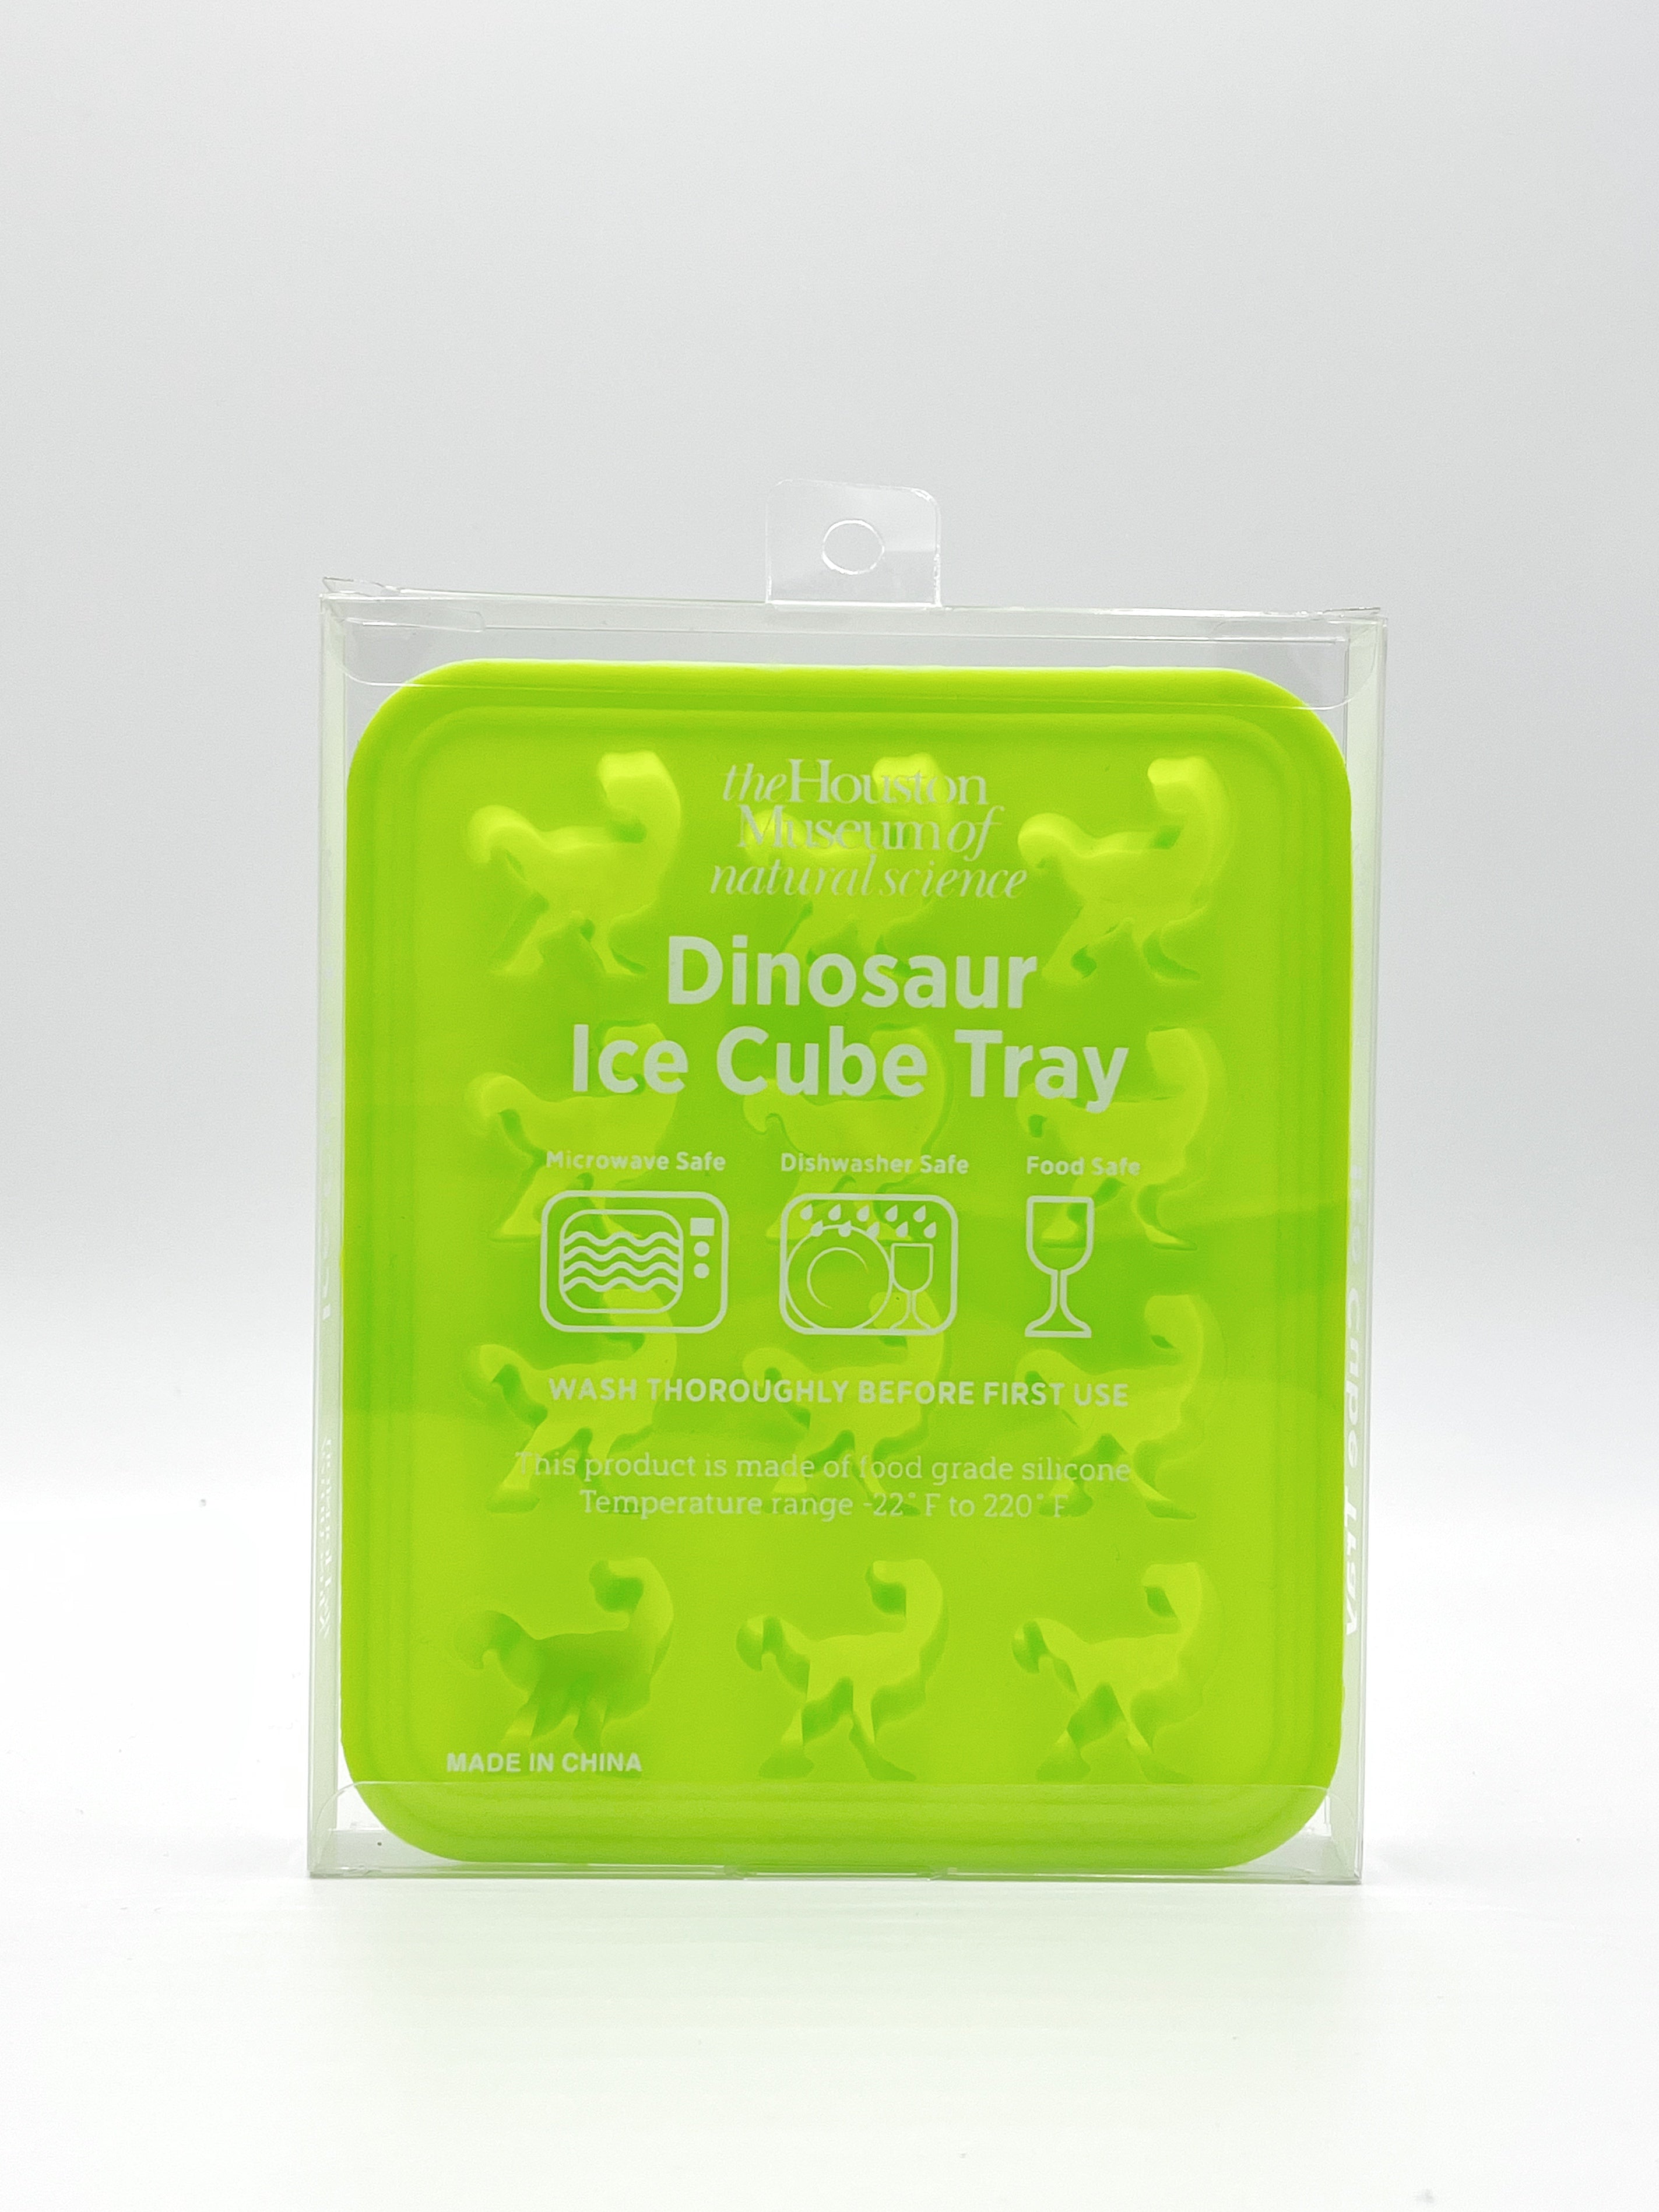 HMNS Dinosaur Ice Cube Tray – Houston Museum of Natural Science